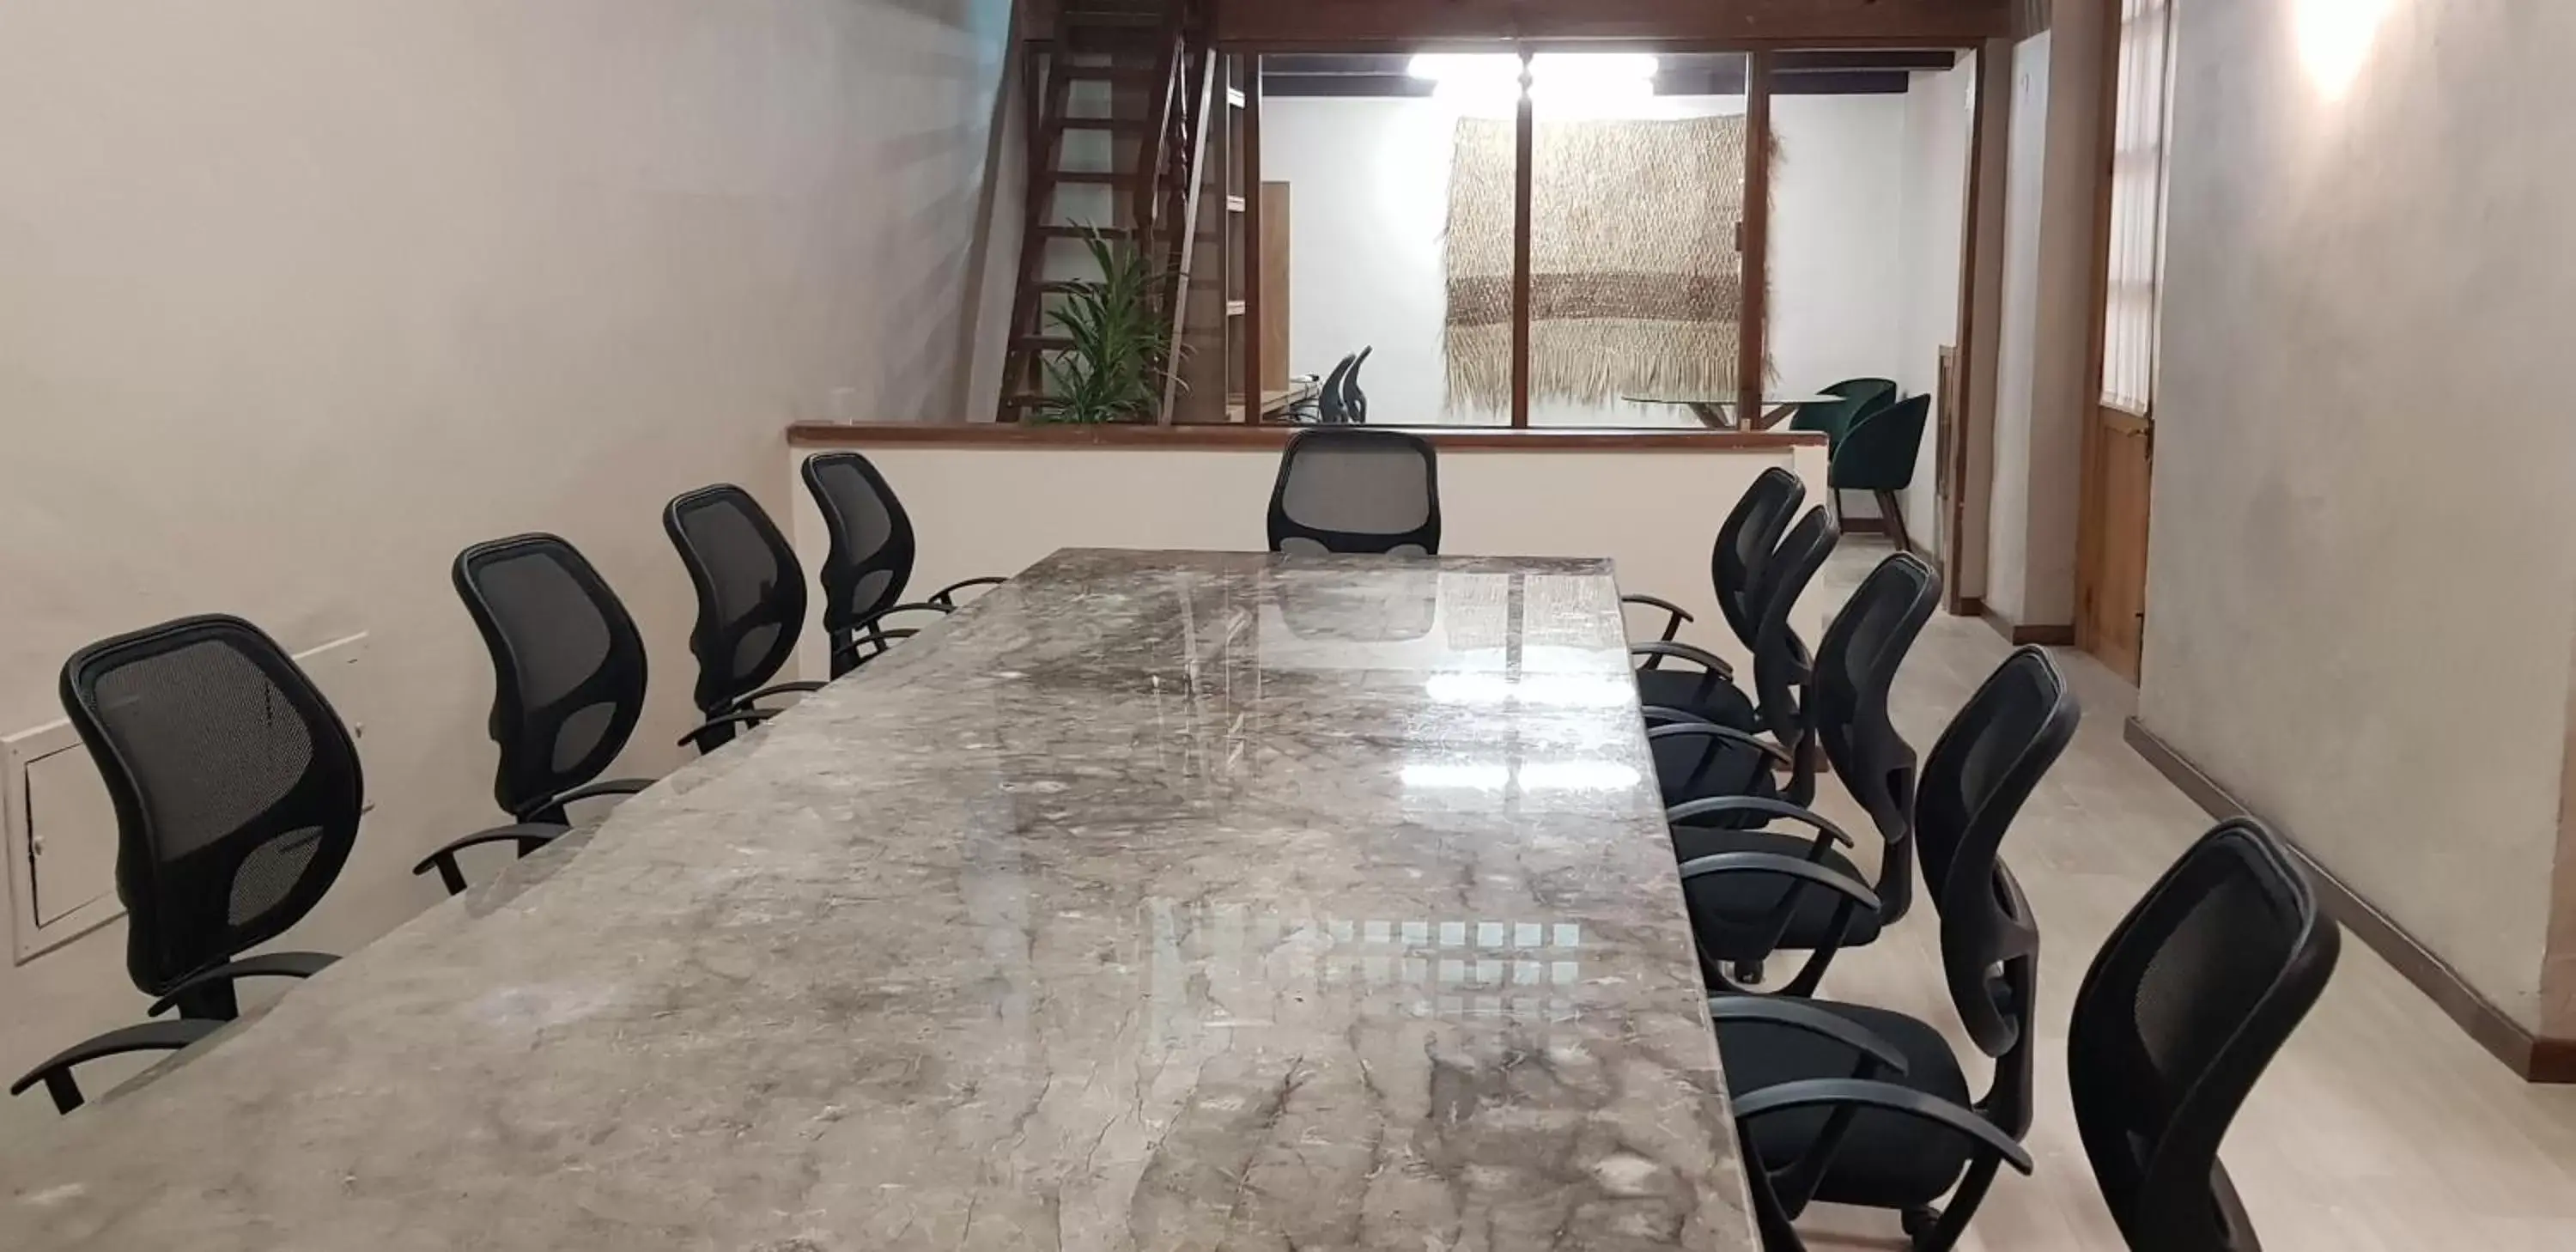 Meeting/conference room in Hotel San Francisco Tlaxcala